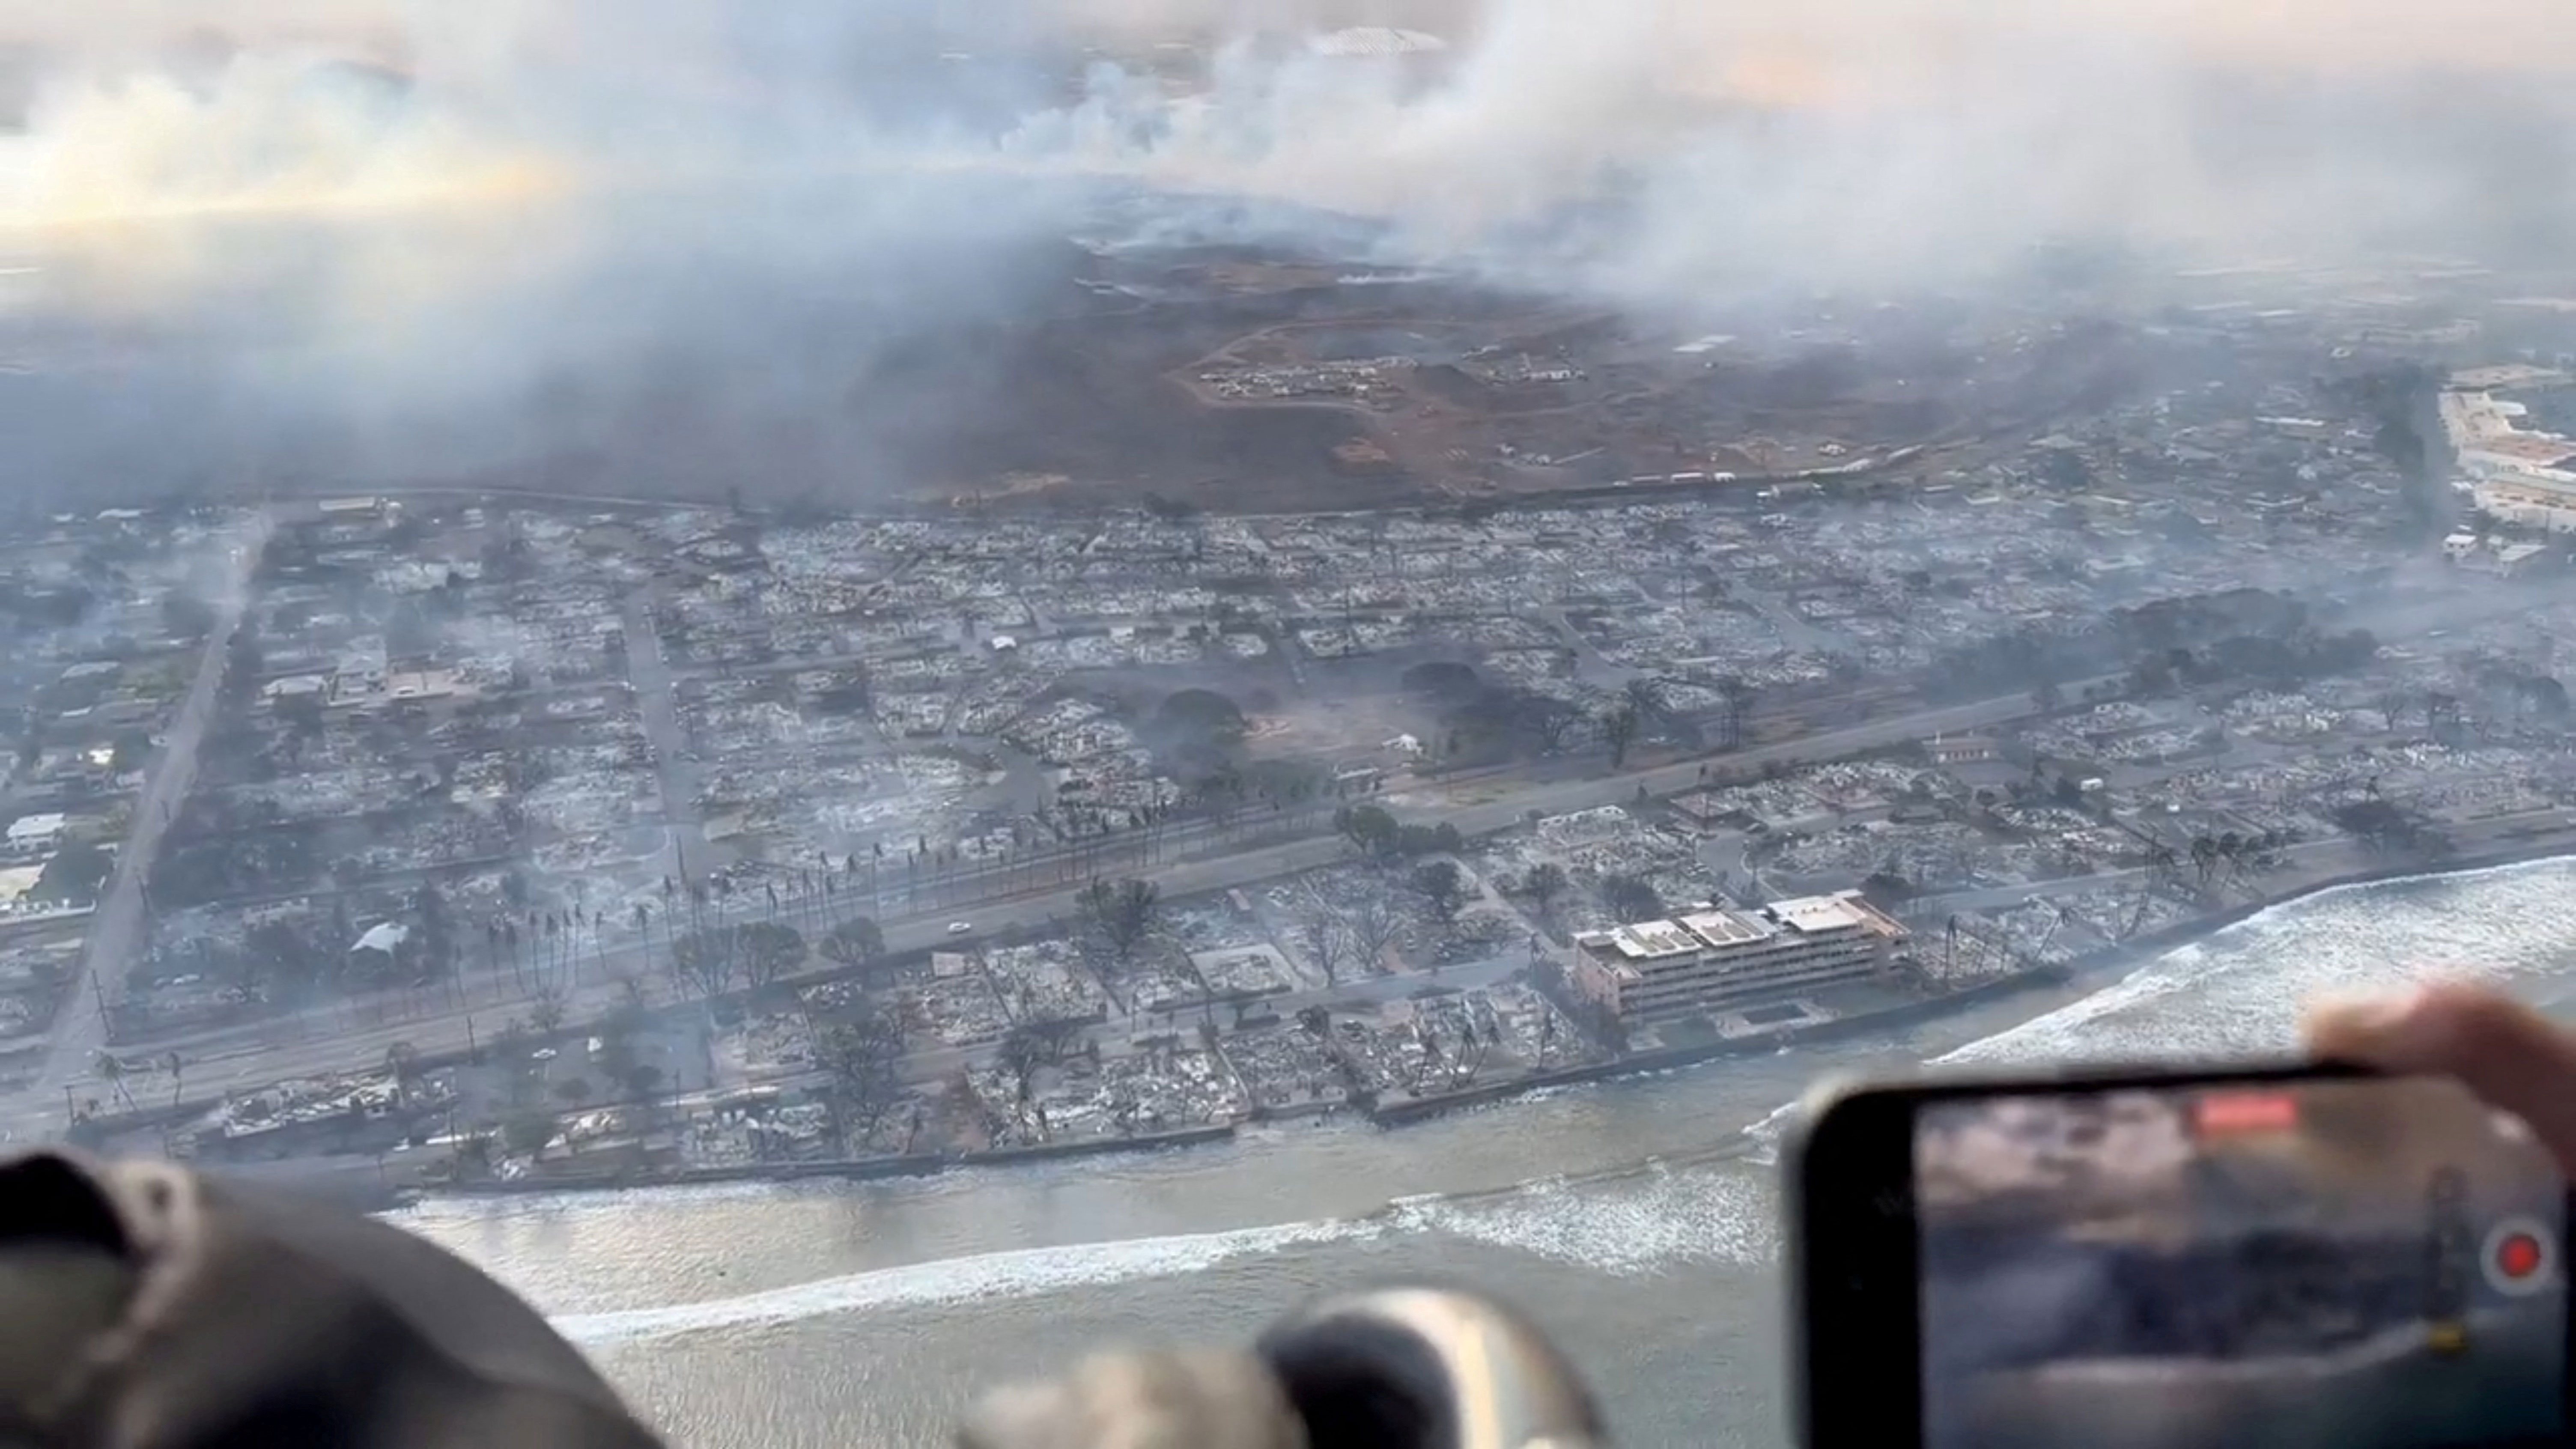 An aerial view shows damage along the coast of Lahaina in the aftermath of wildfires in Maui, Hawaii, on August 9 in this screen grab obtained from social media video.